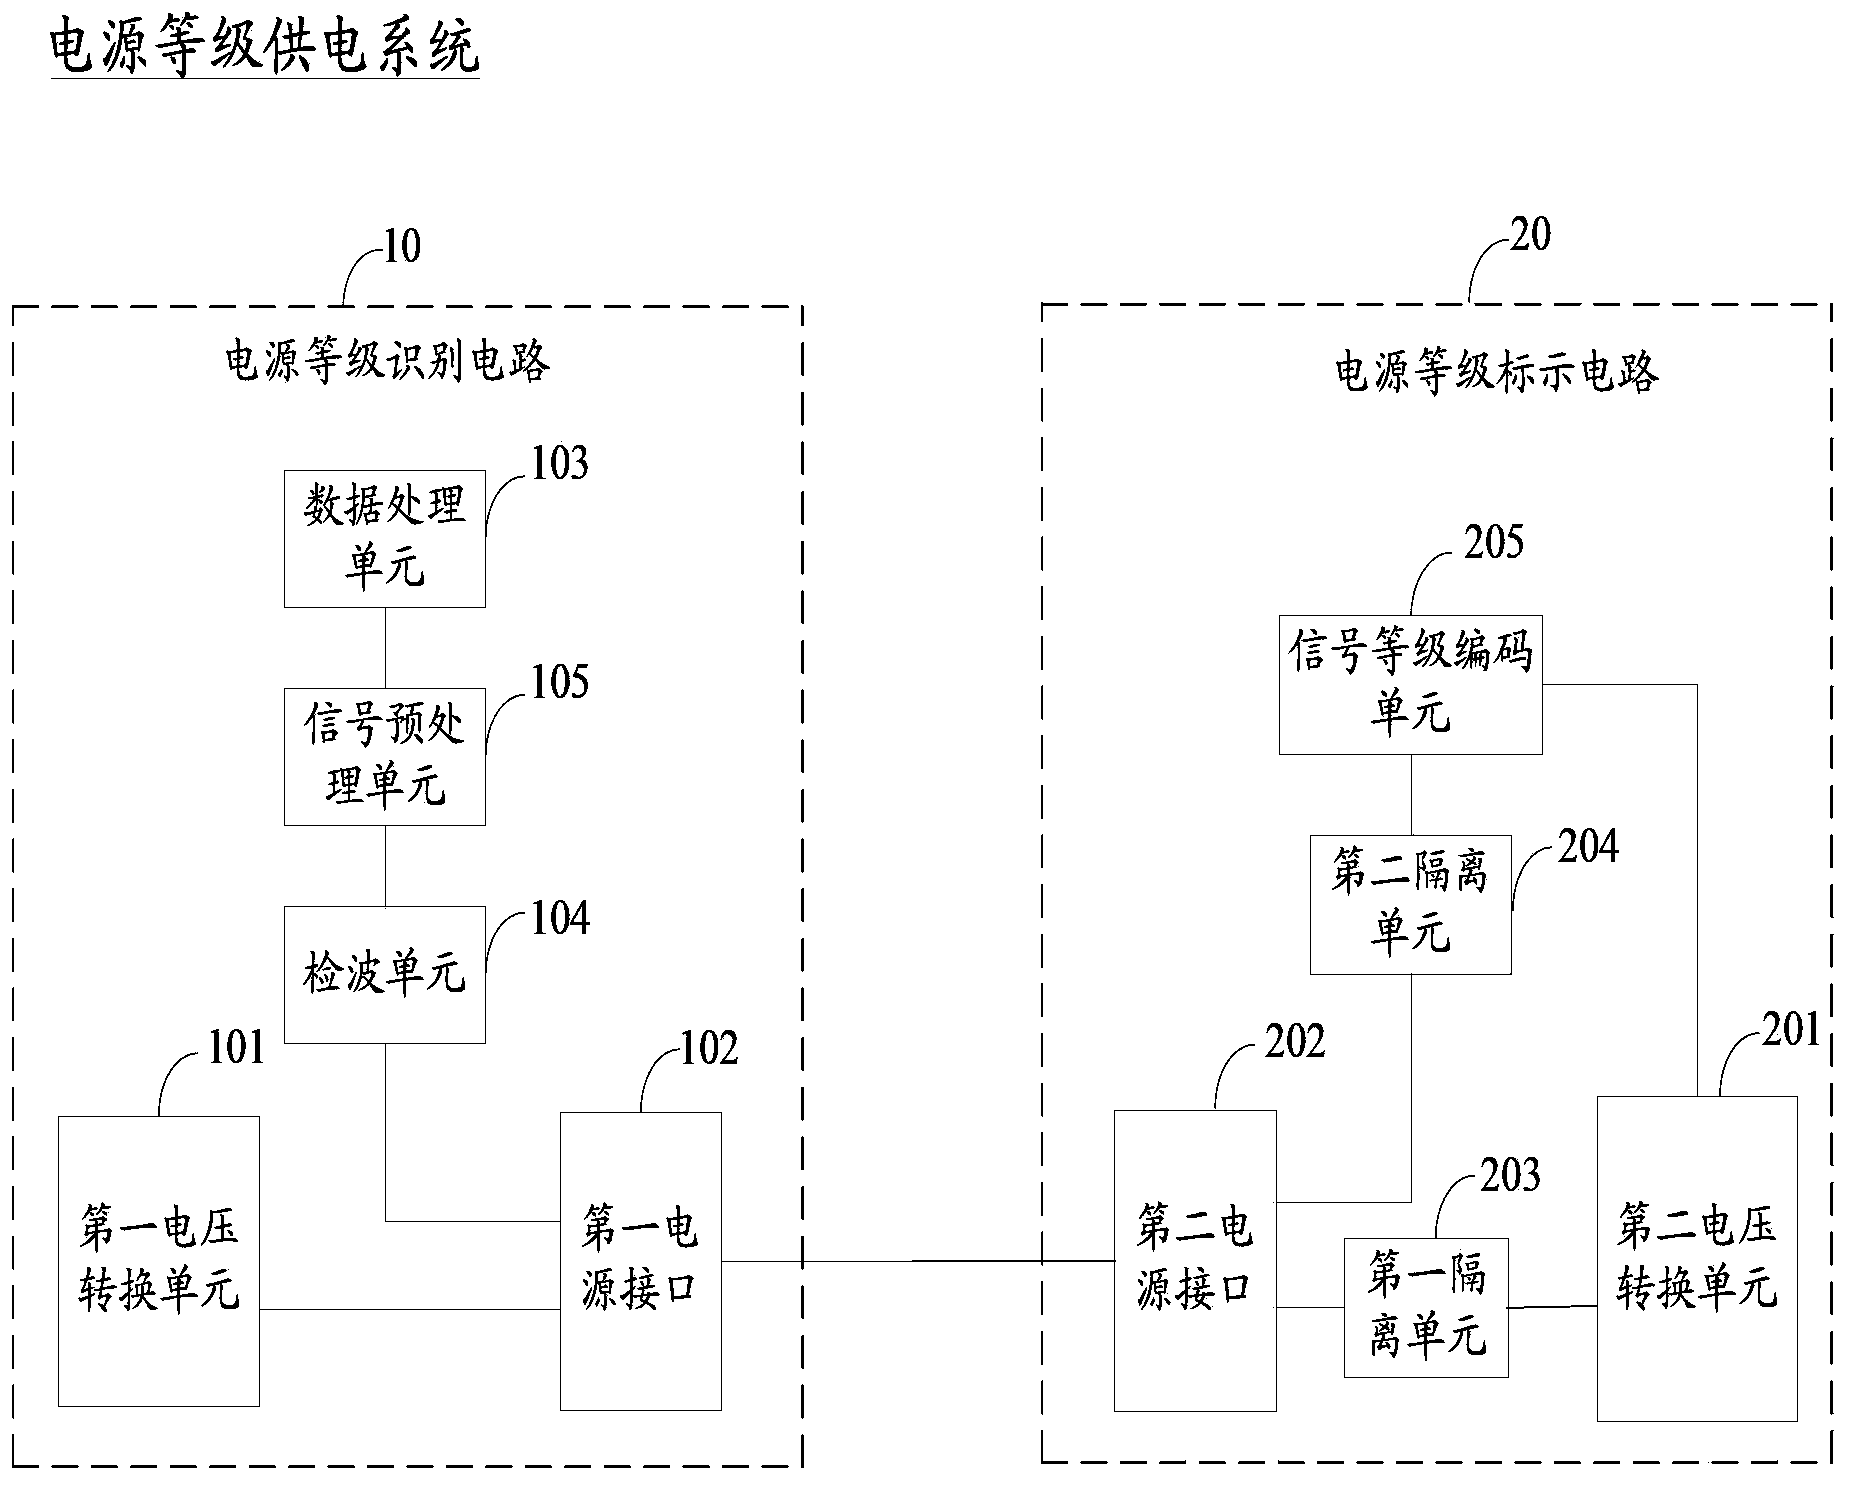 Power source grade recognition circuit, power source grade marking circuit and power source grade power supply system